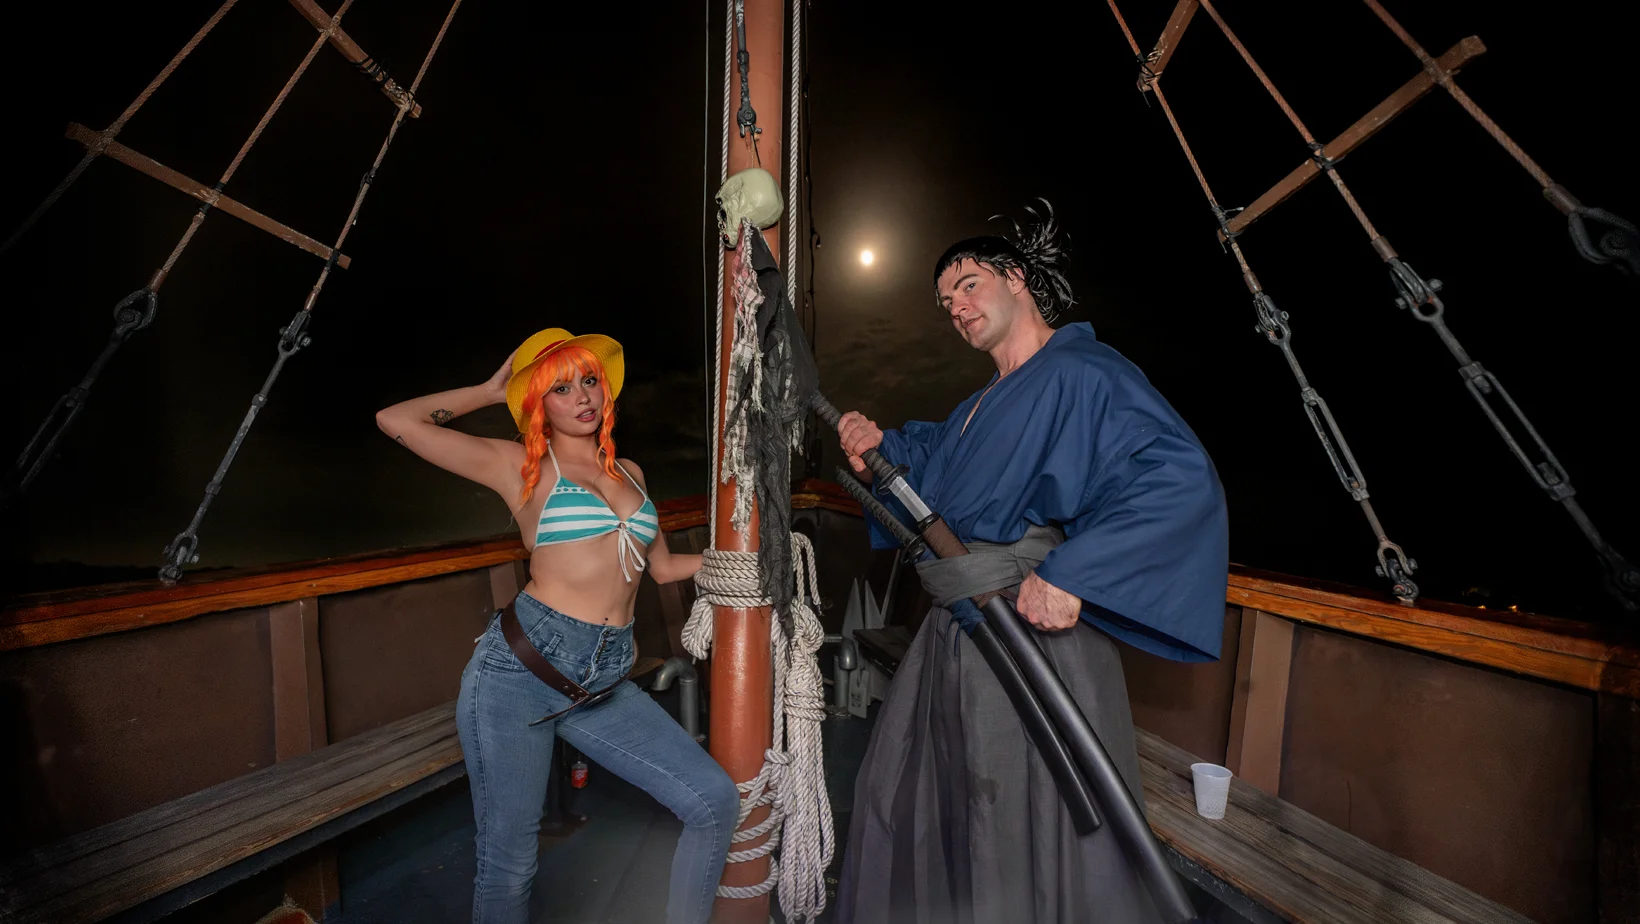 Pirate Cosplay Friends Posing On A Pirate Boat